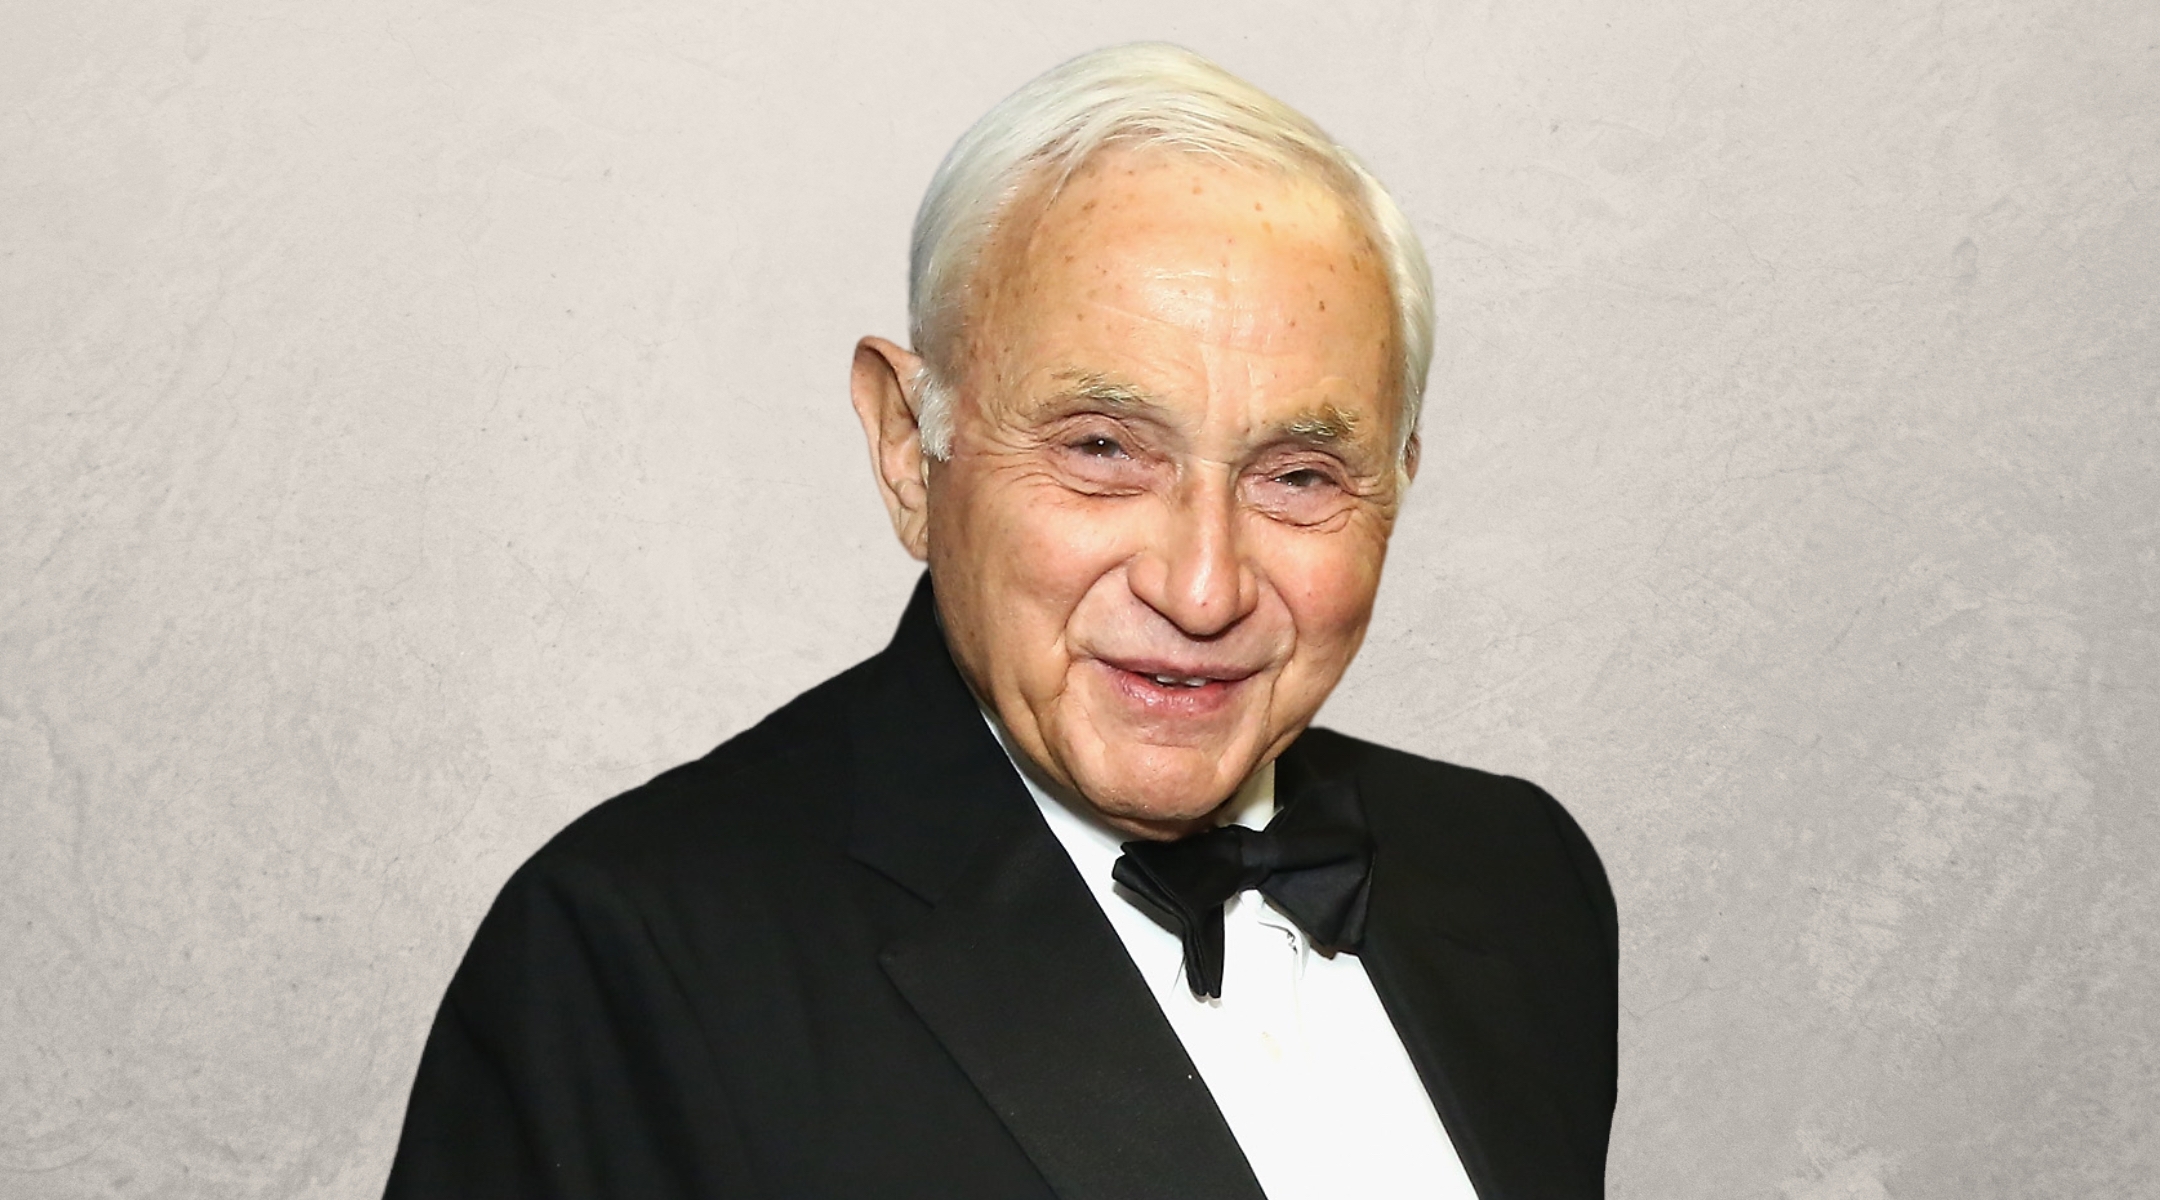 Businessman and philanthropist Leslie Wexner, above, had close business and personal ties with Jeffrey Epstein, who was awaiting trial on federal sex-trafficking charges before his suicide in 2019. (Astrid Stawiarz/Stringer/Getty Images)